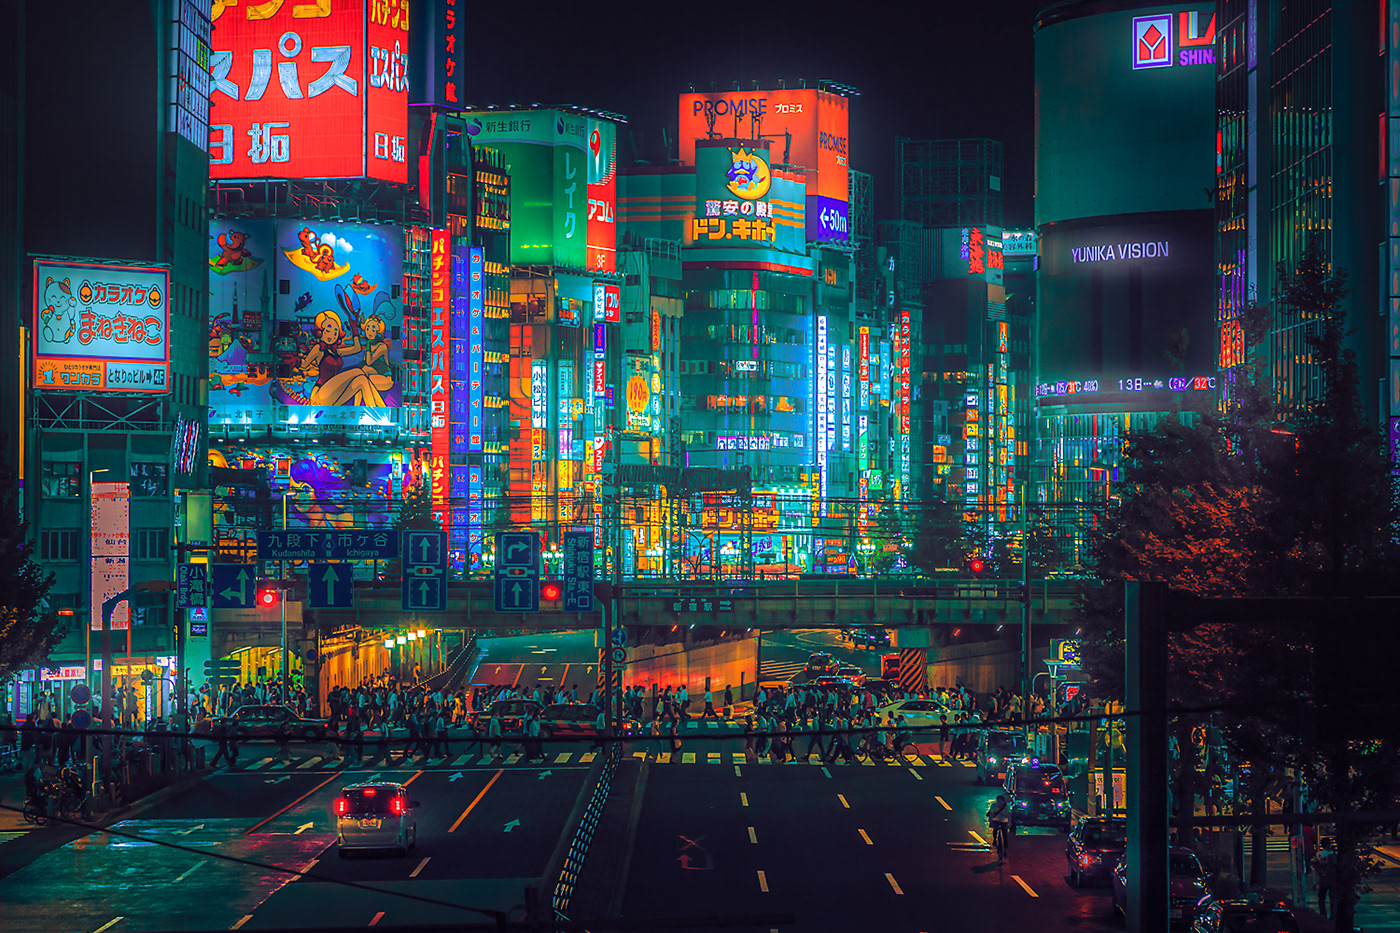 Anthony presley art city culture japan night Photography  surreal Travel Urban